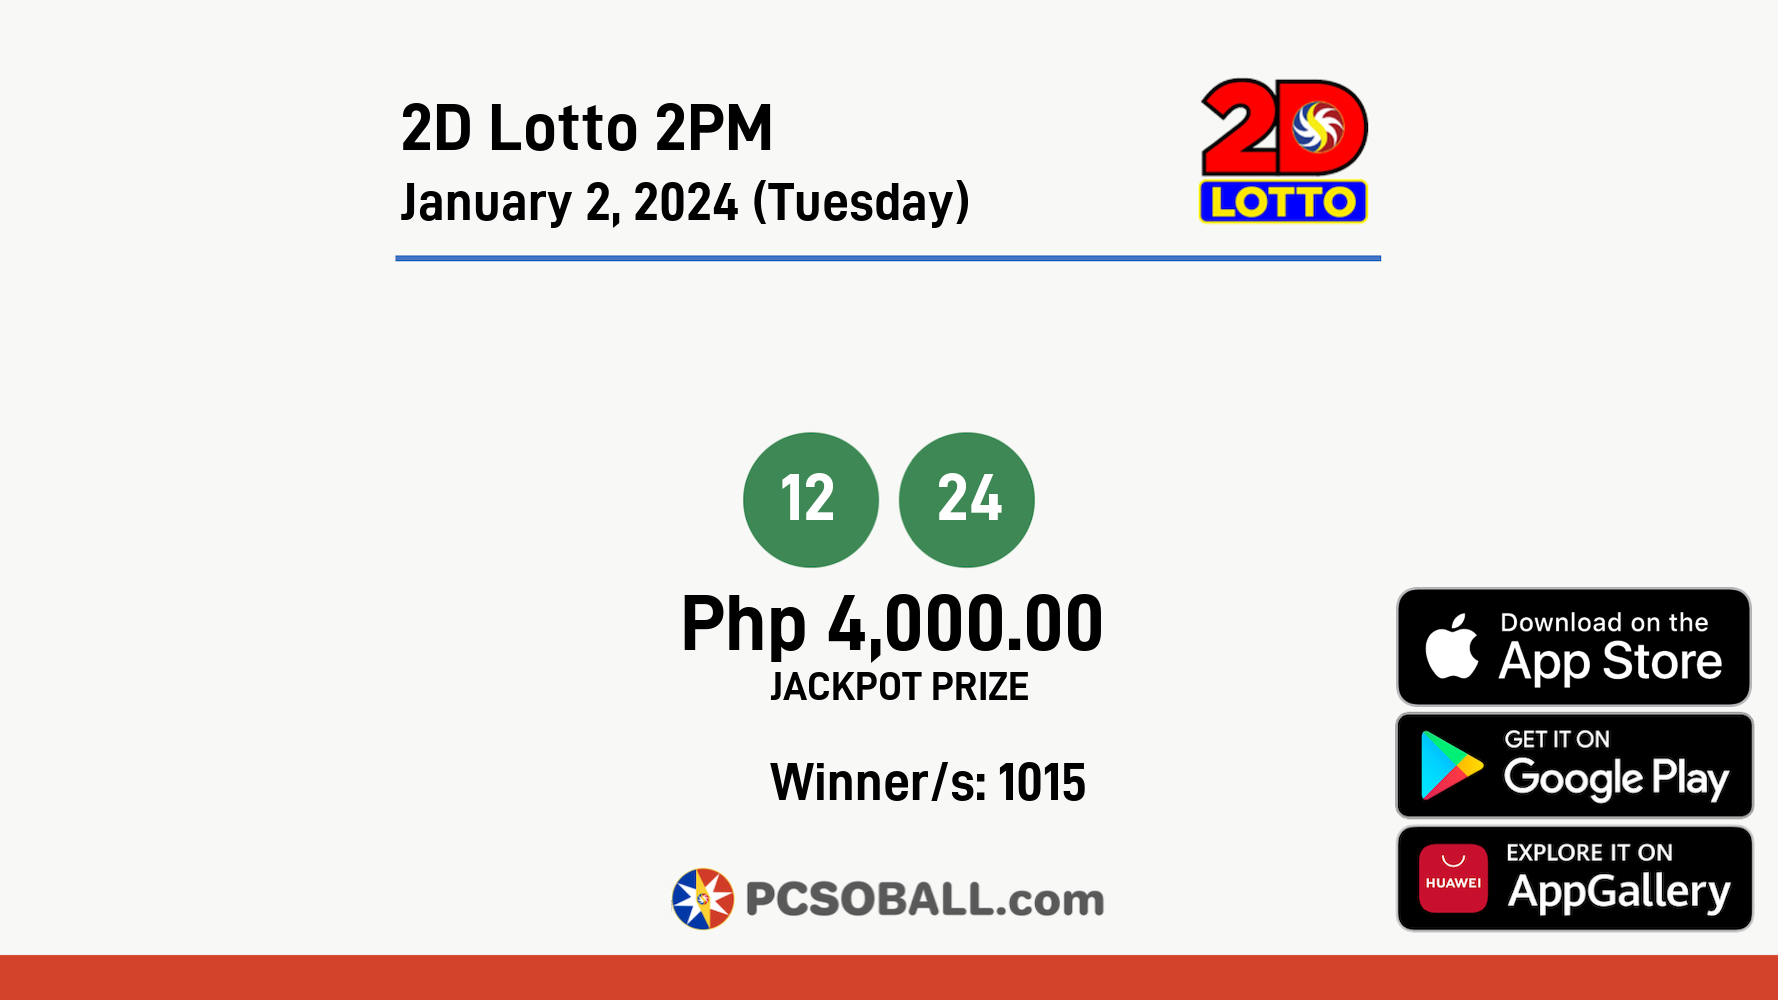 2D Lotto 2PM January 2, 2024 (Tuesday) Result